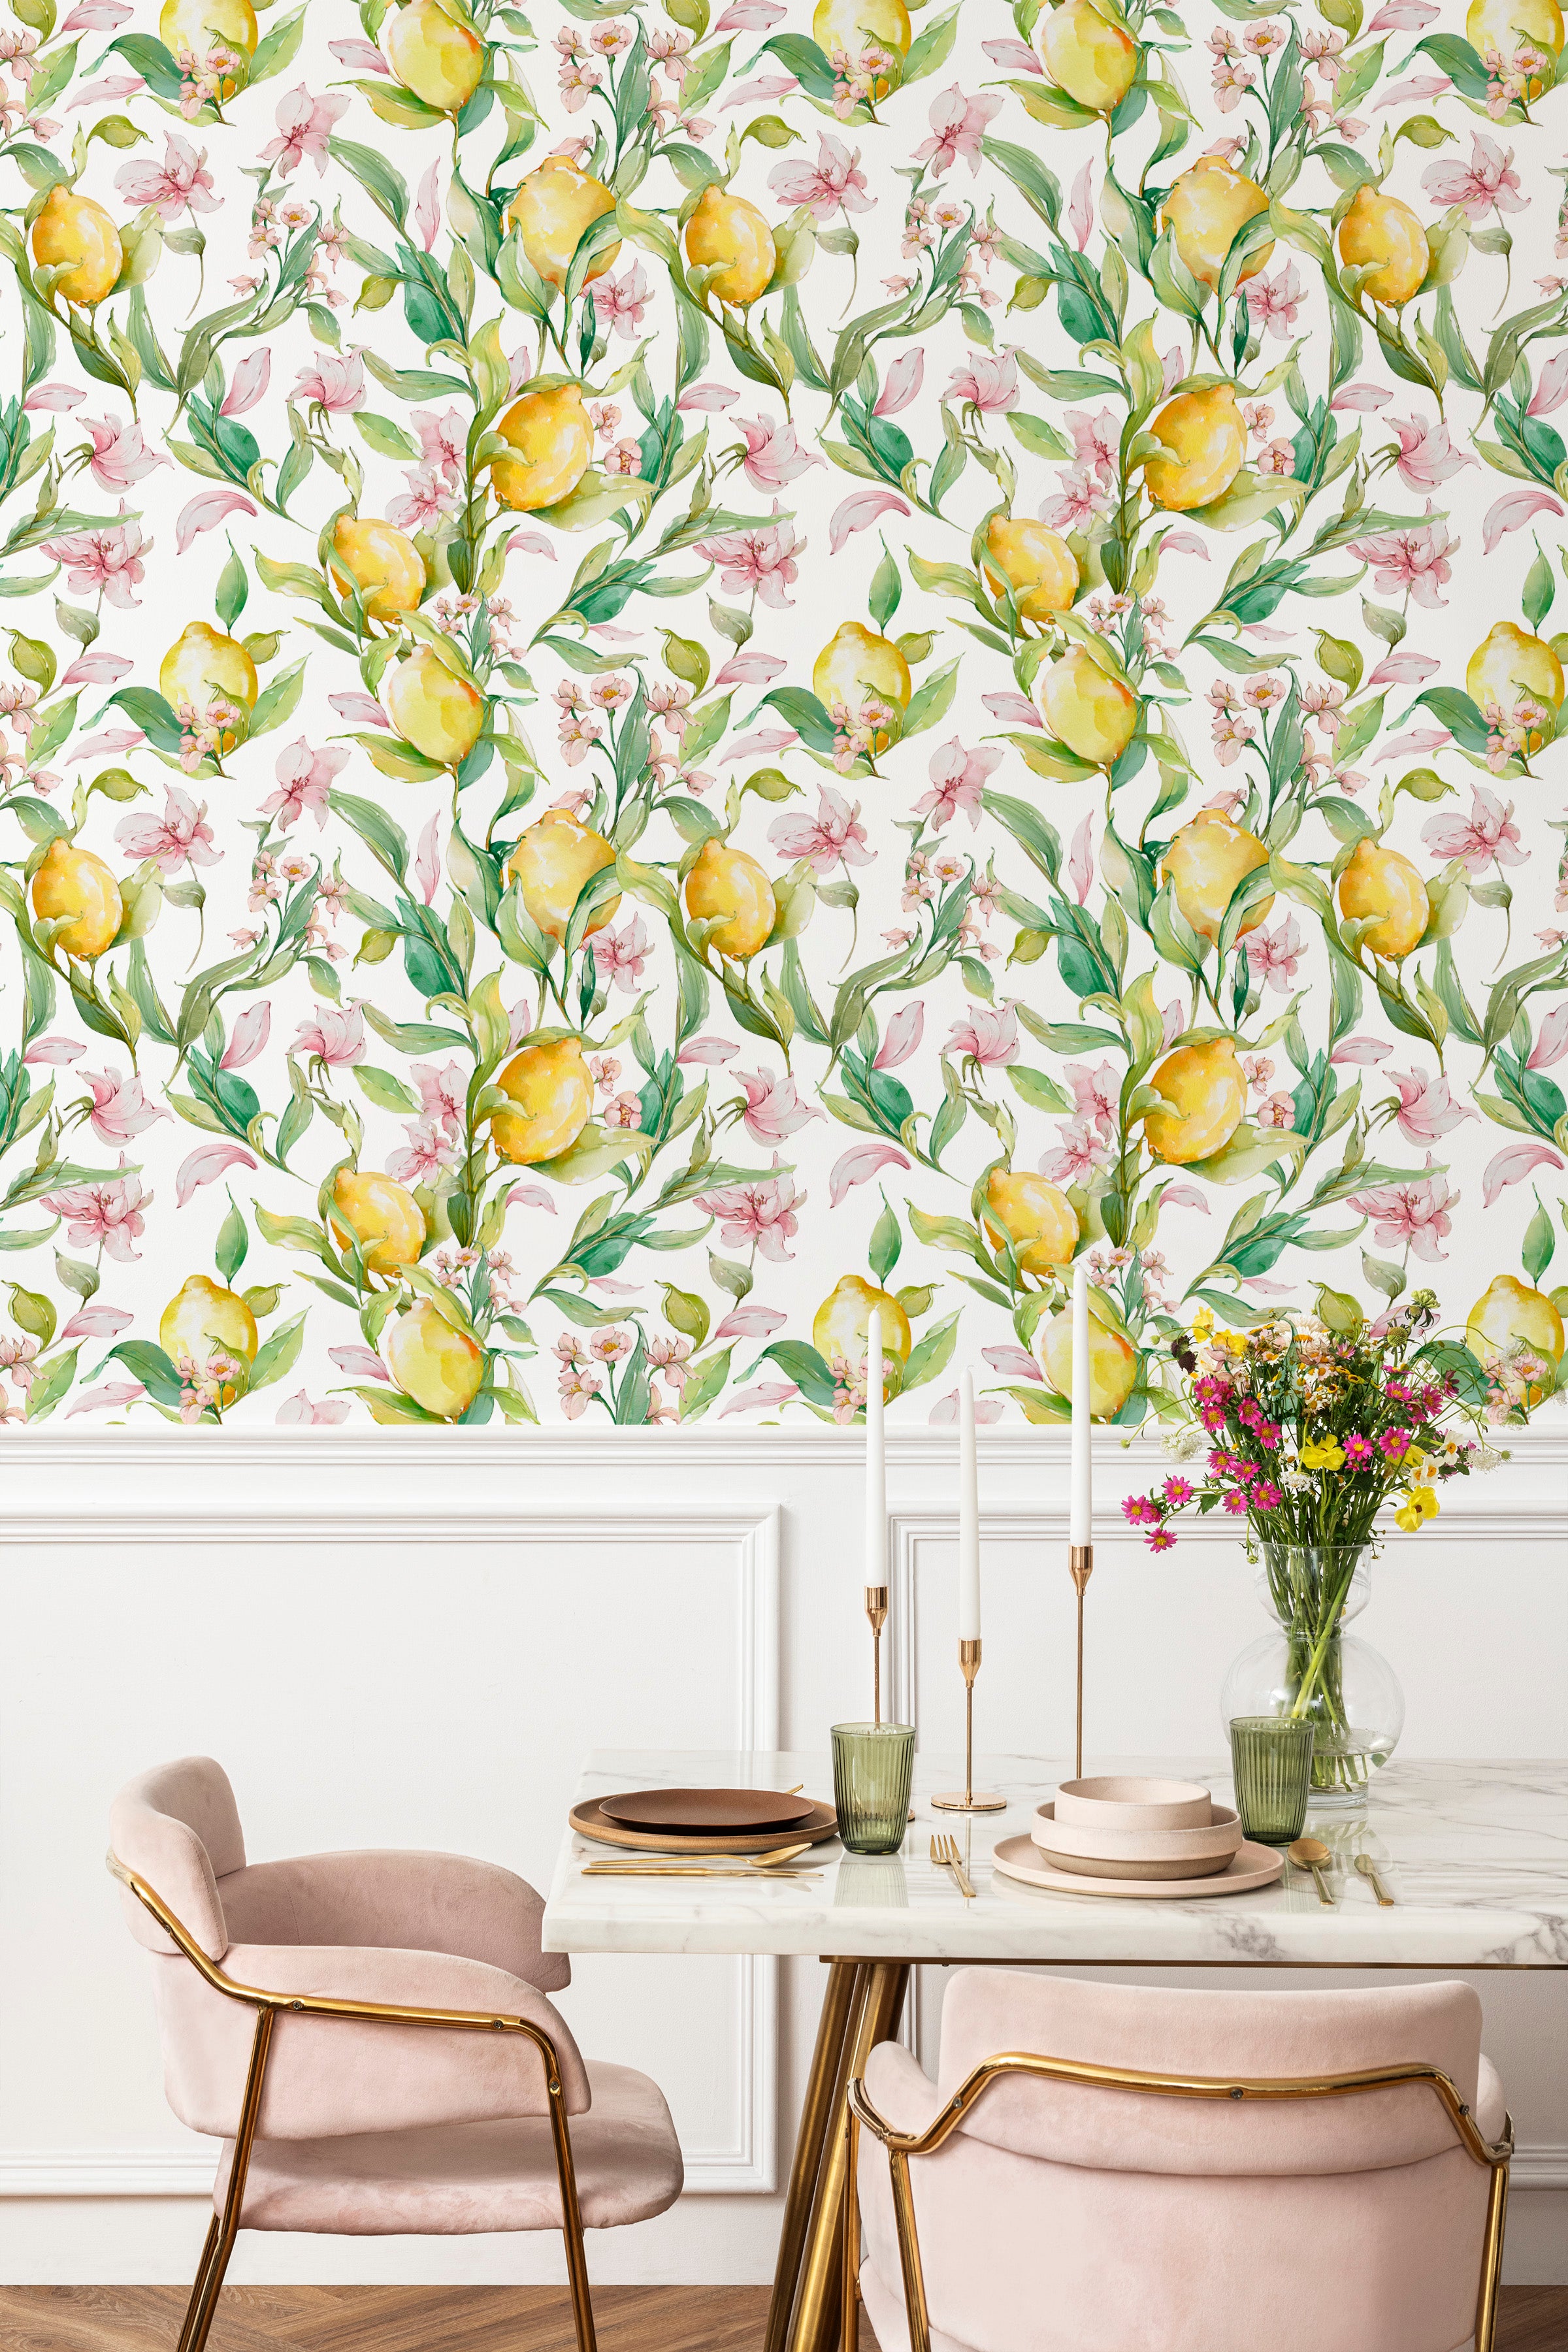 Elegant dining area enhanced by Citrus Blossom Wallpaper, featuring lush yellow lemons and pink blossoms on a vibrant green vine pattern. The fresh and lively wallpaper sets a charming backdrop for the chic marble table and plush pink chairs, creating an inviting space for dining